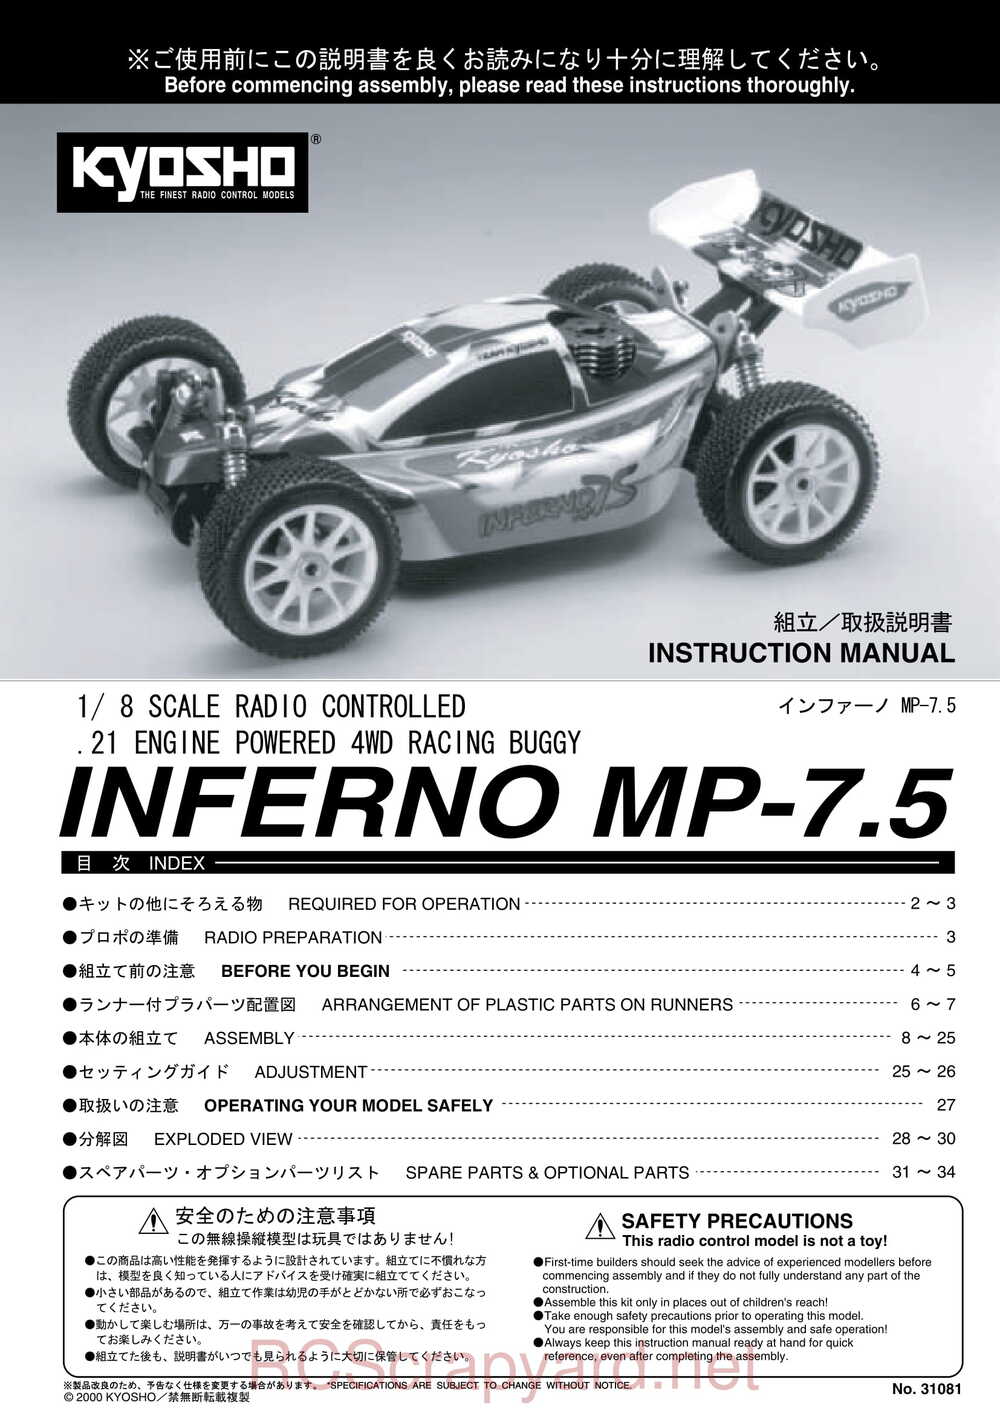 Kyosho - 31081- Inferno-MP-7-5 - Manual - Page 01